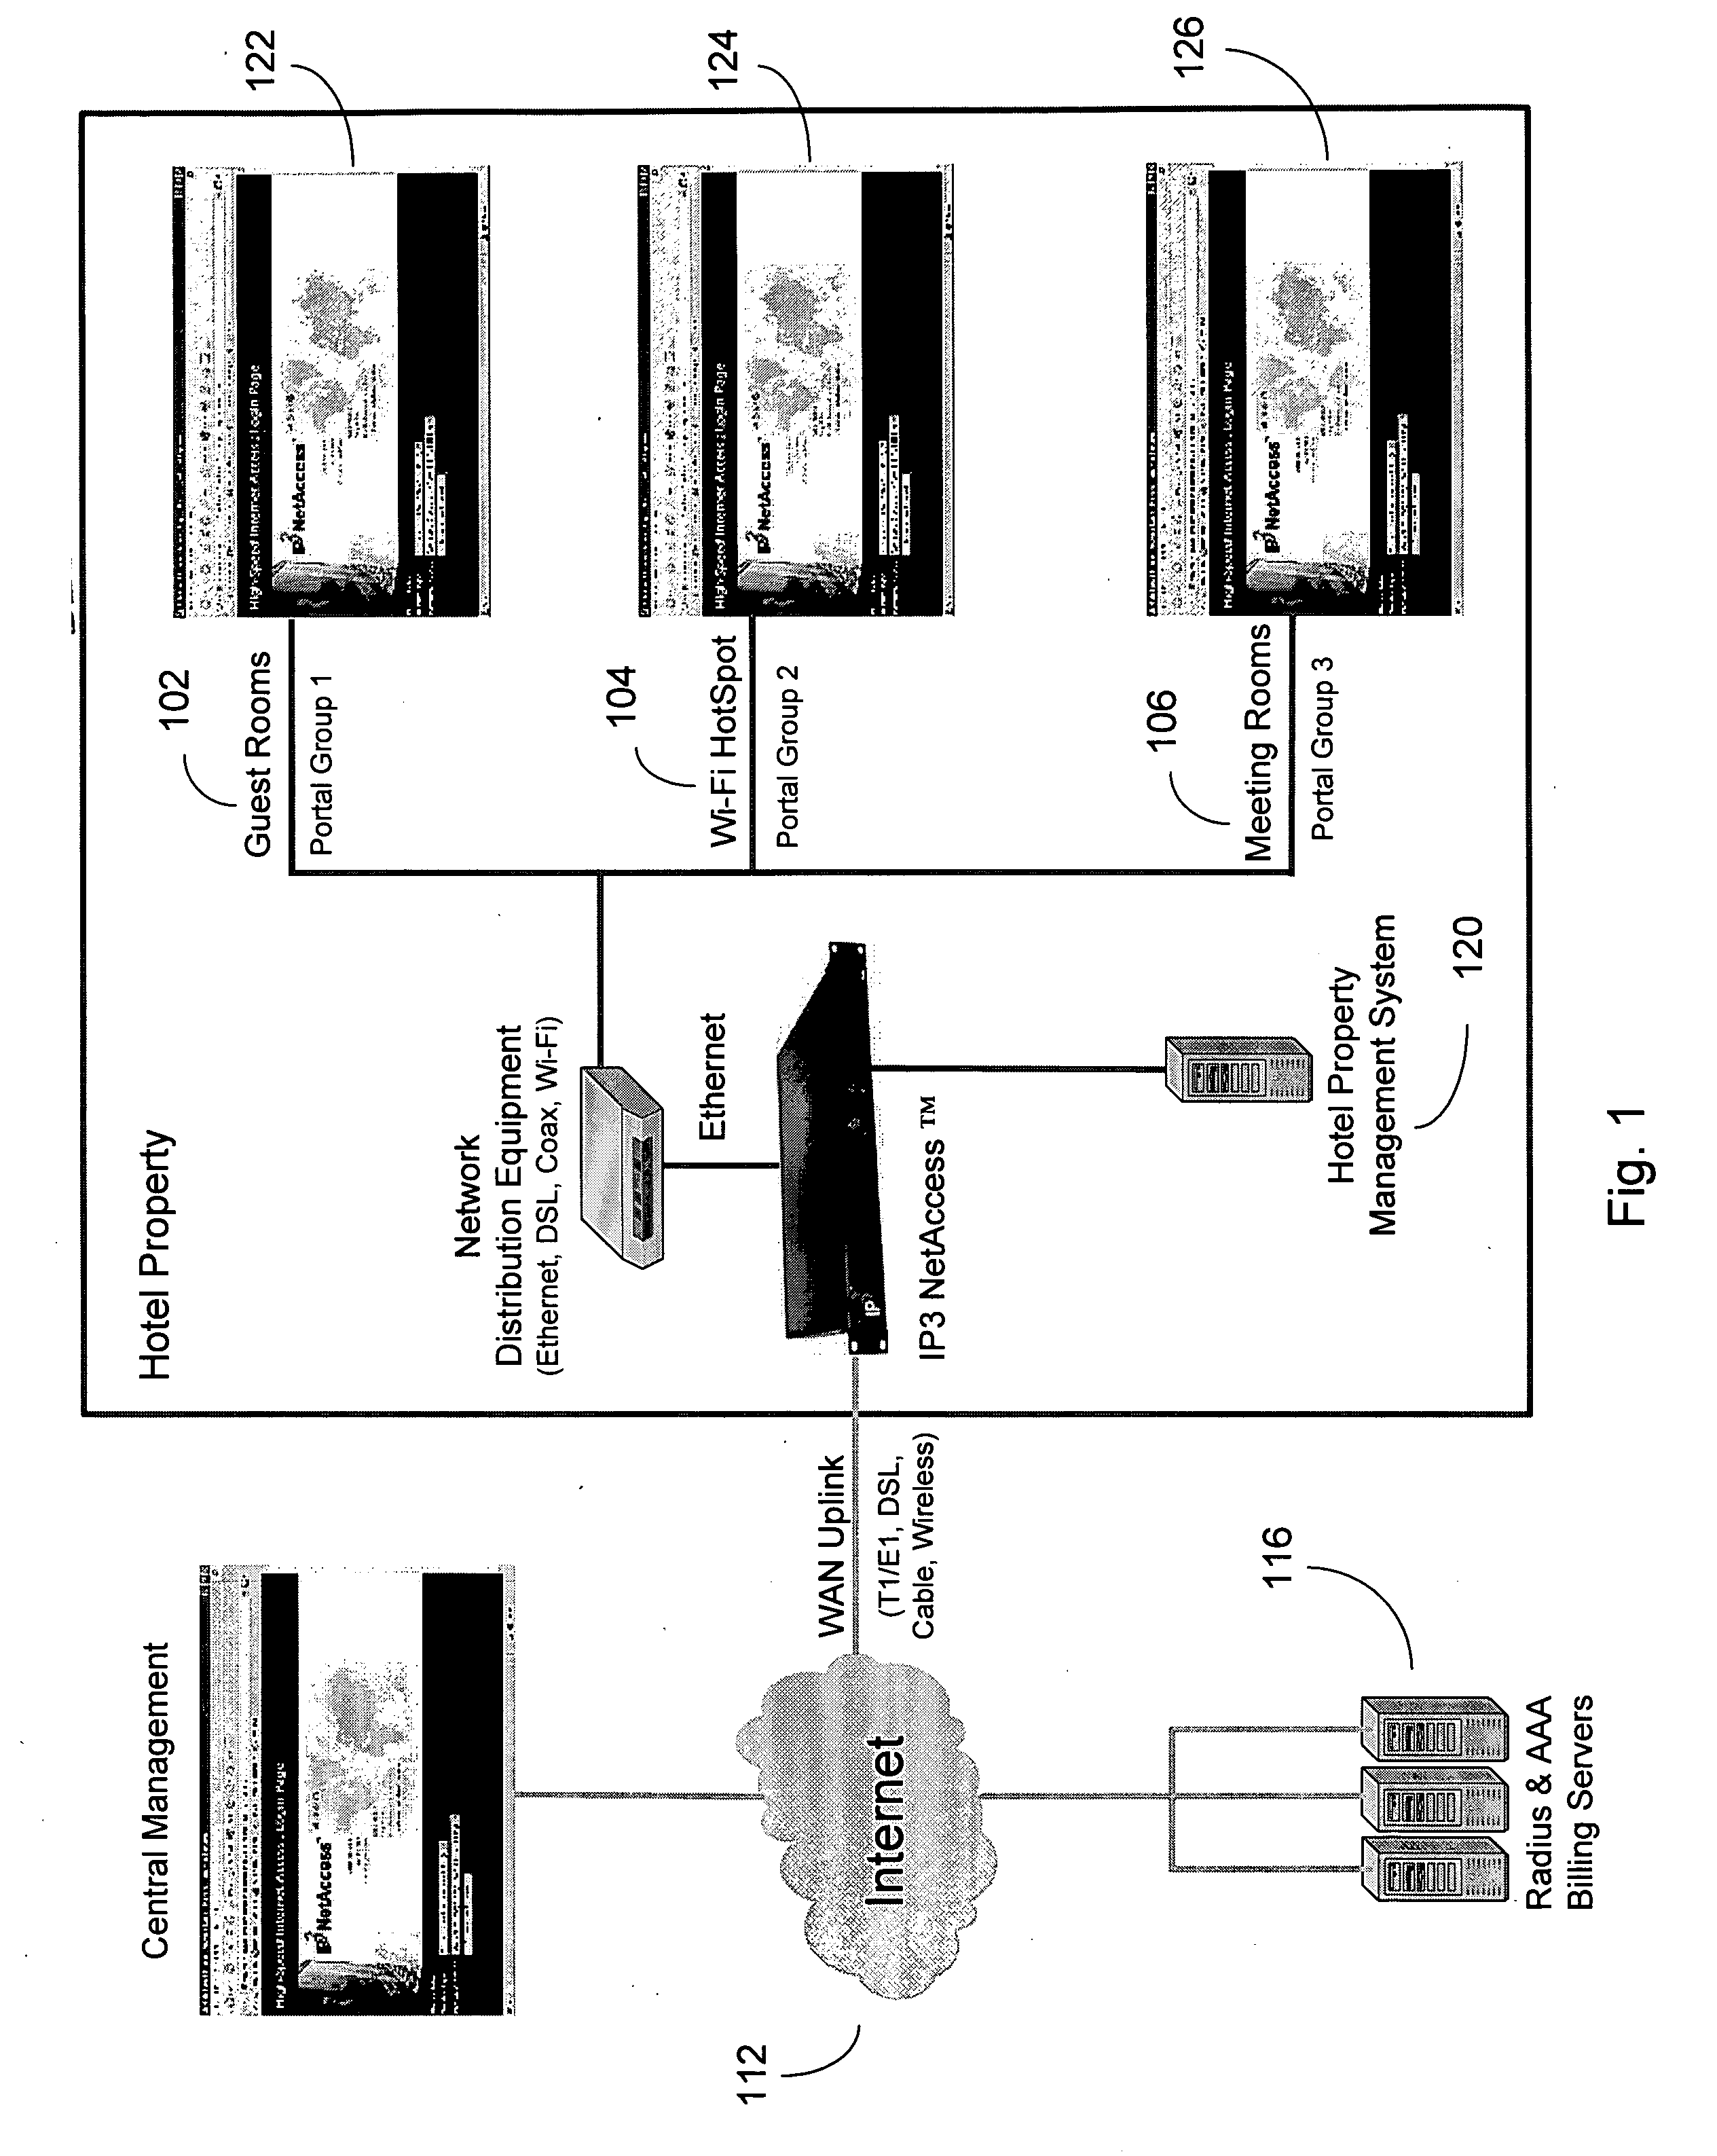 Systems and methods for multi-level gateway provisioning based on a device's location